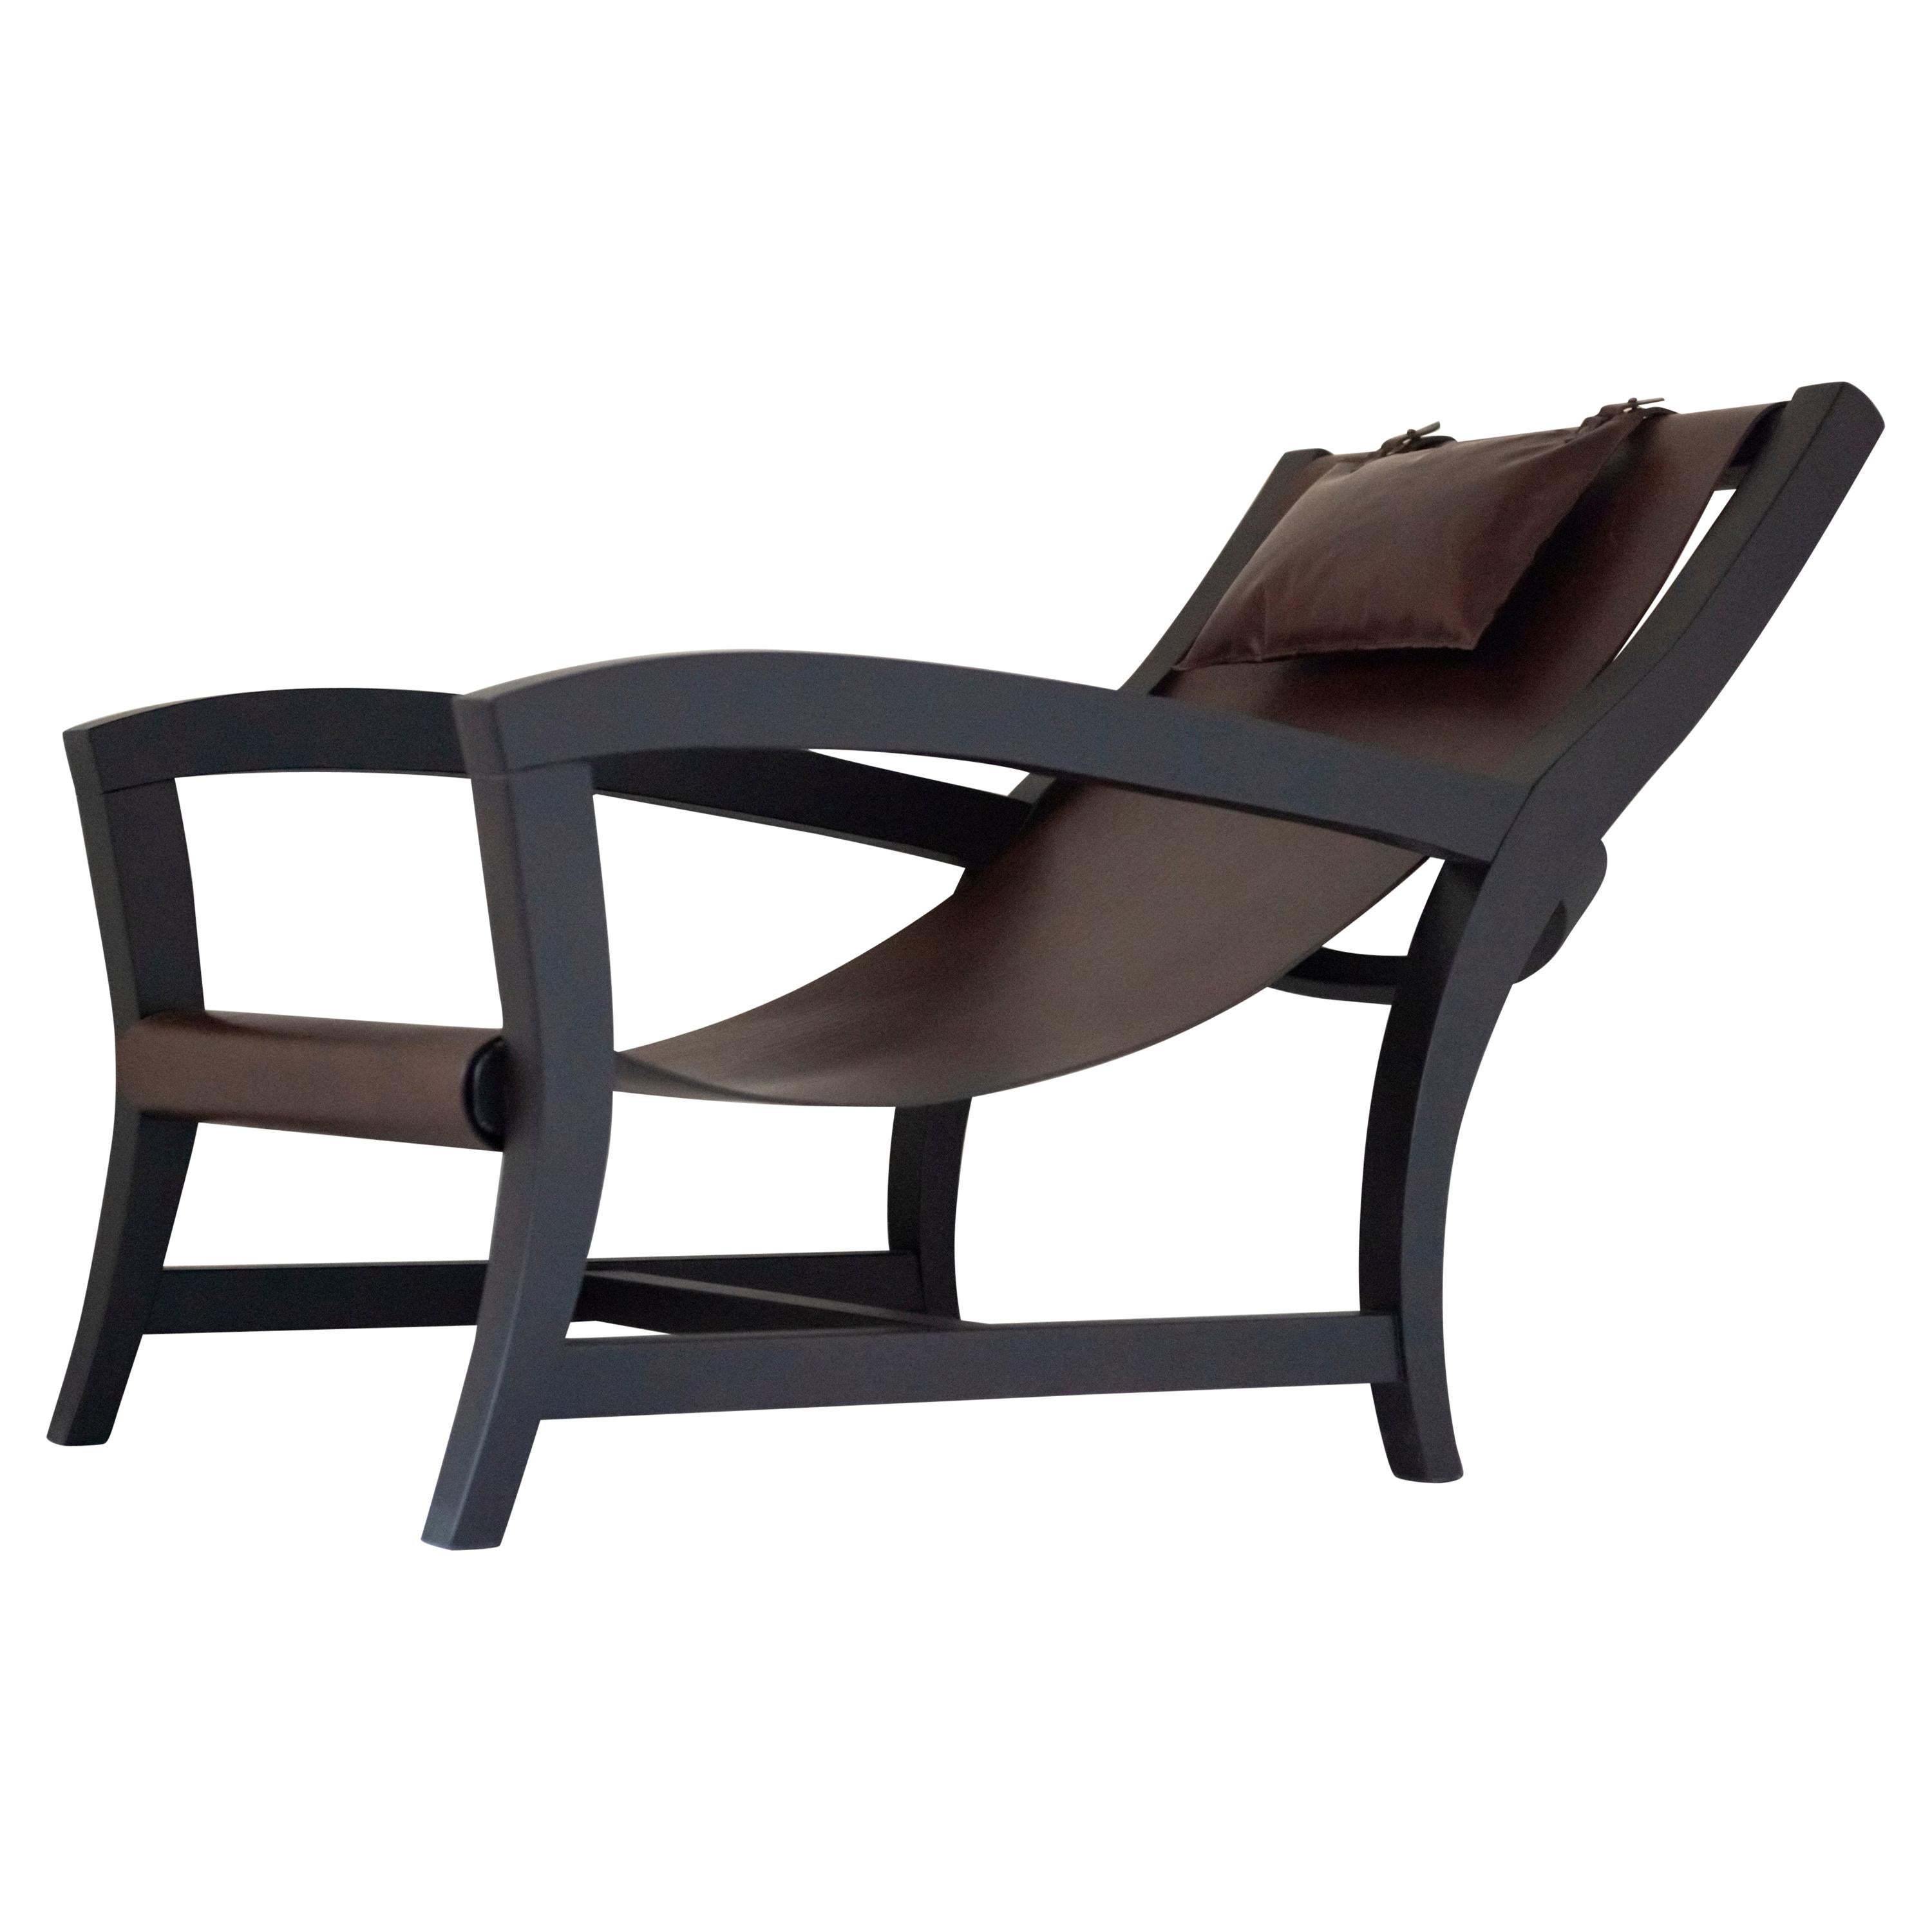 Elba, Deckchair Inspiration for This Leather and Beechwood Indoor Lounge Chair For Sale